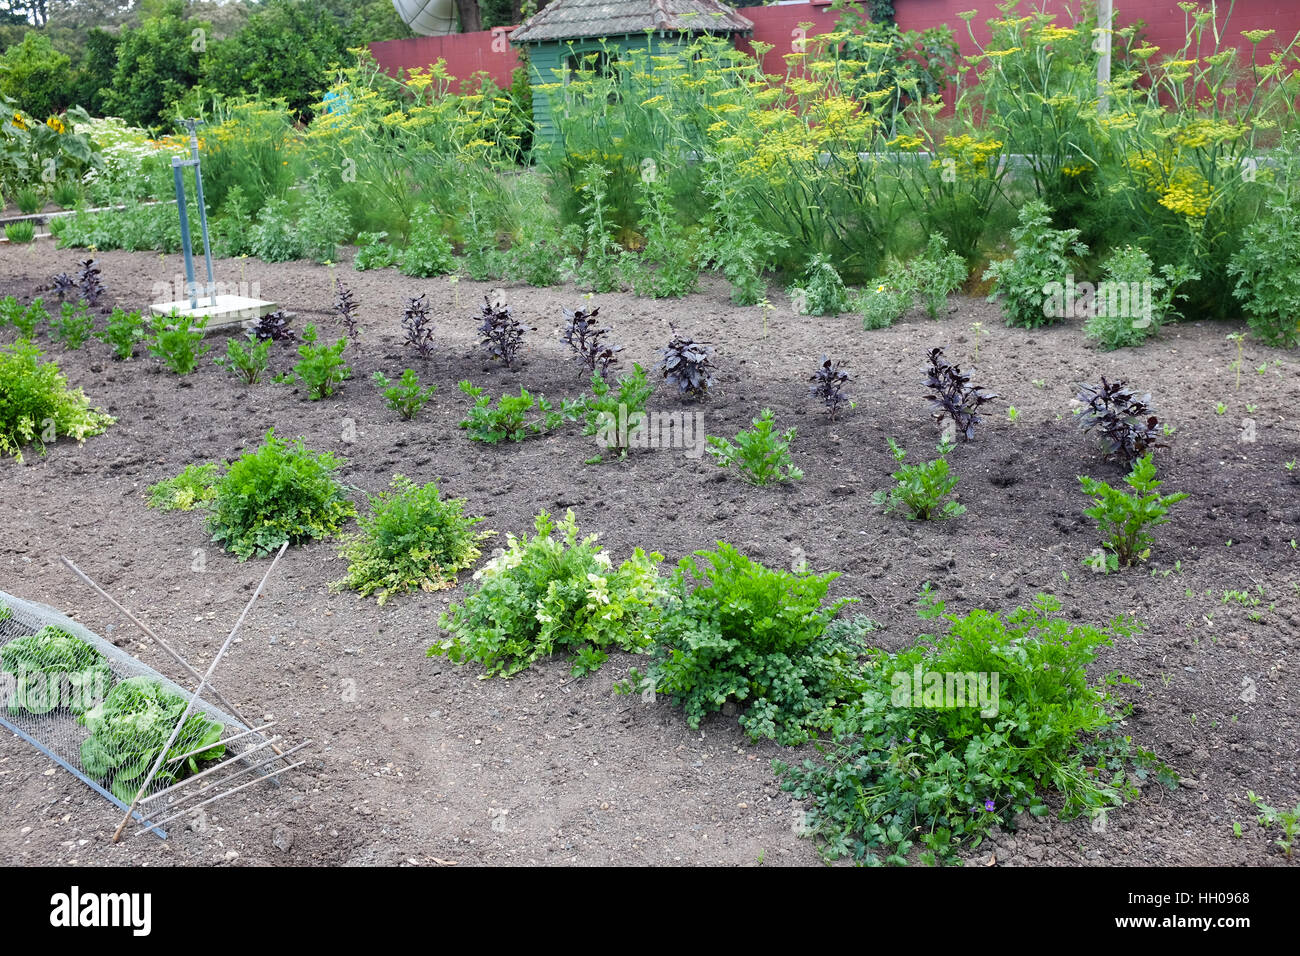 An allotment growing vegetables. Stock Photo